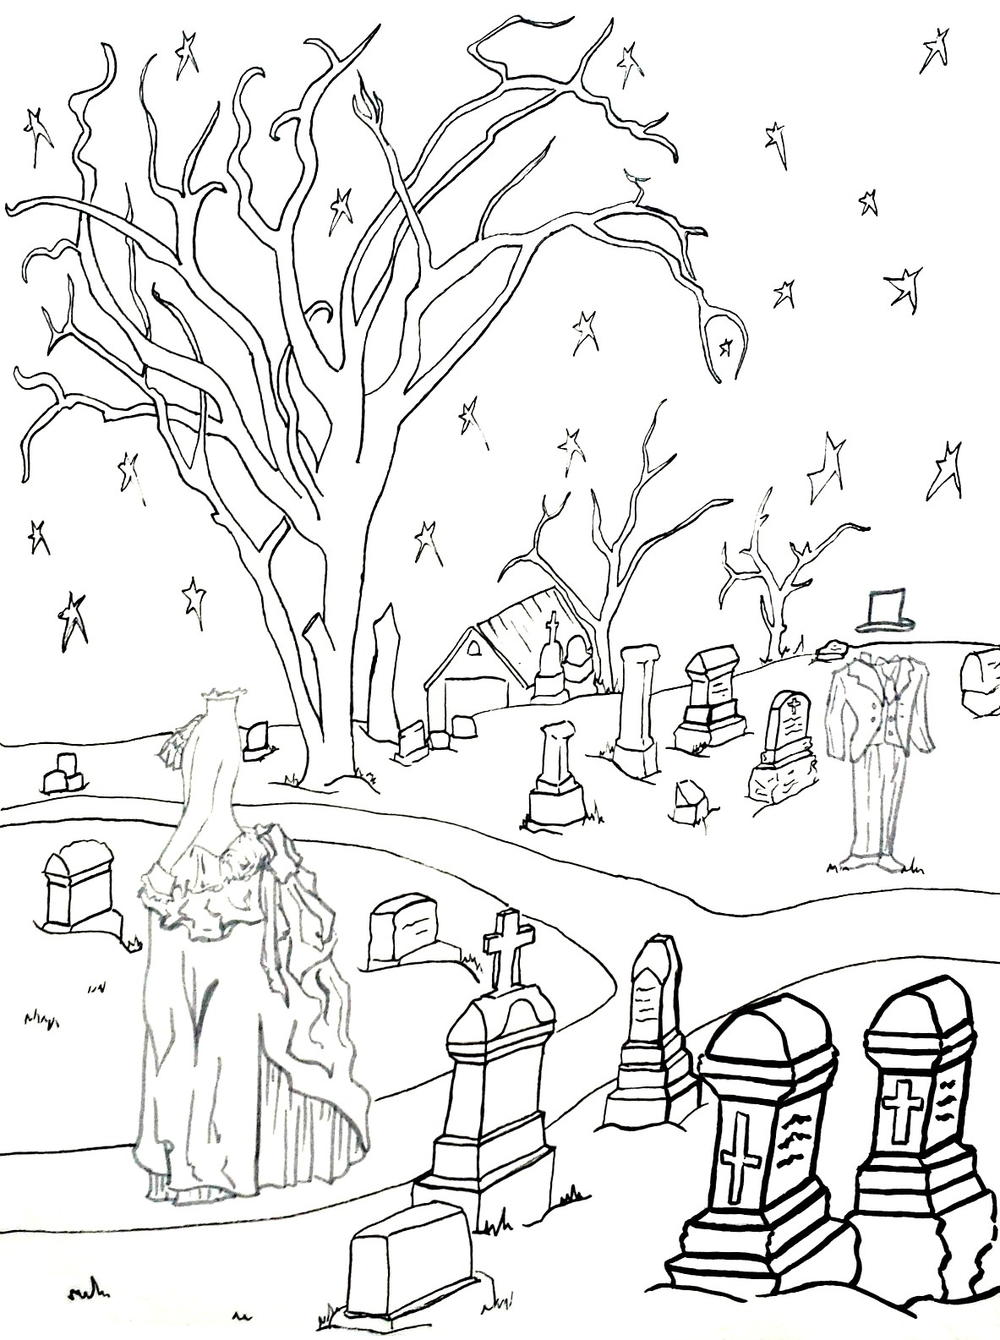 Ghostly Graveyard Coloring Page | FaveCrafts.com